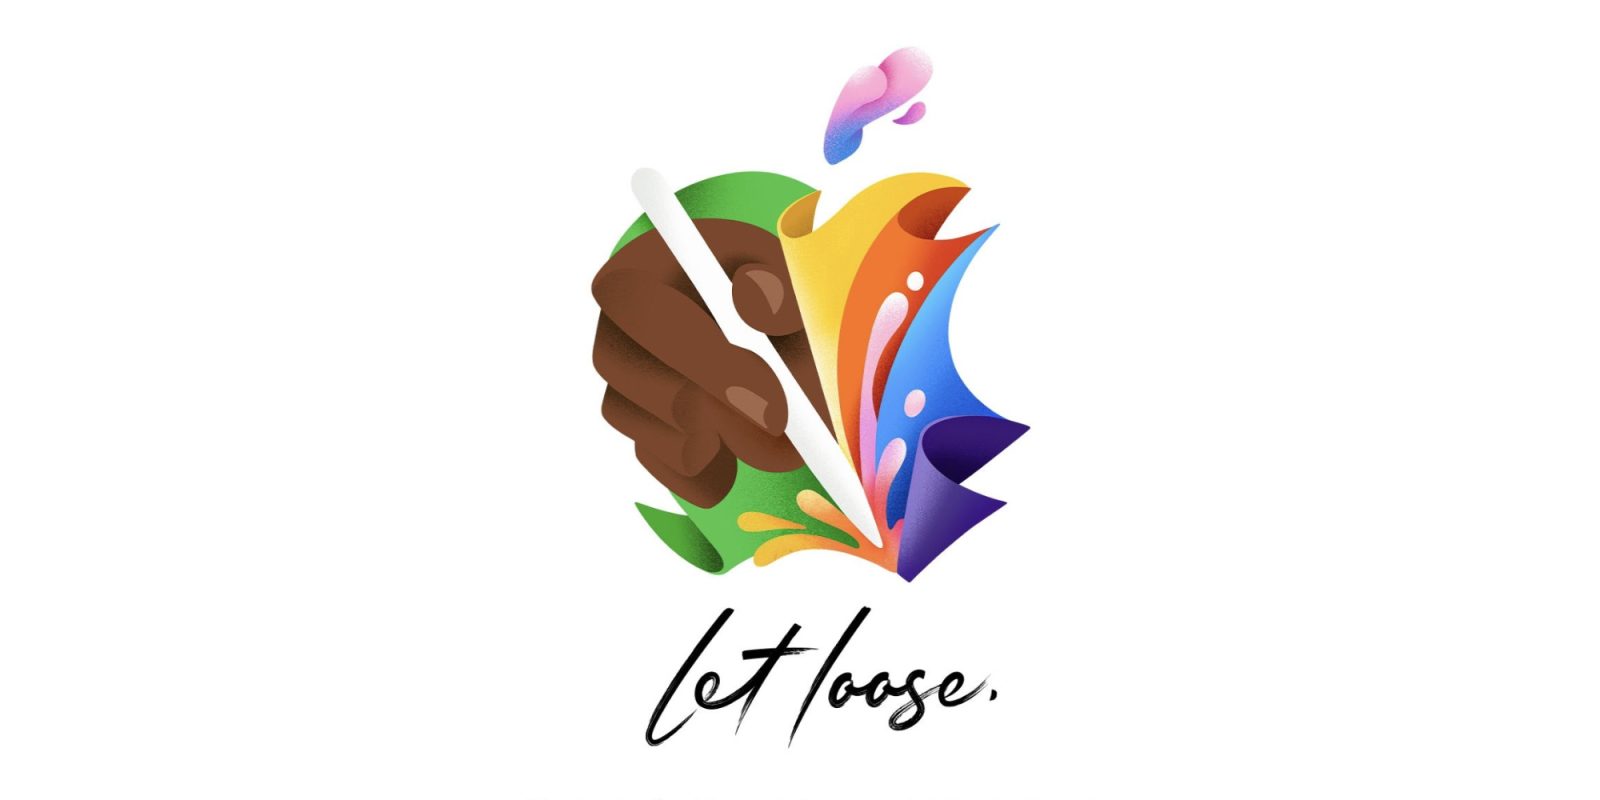 Apple announces special event for May 7: &#8216;Let Loose&#8217; &#8211; 9to5Mac